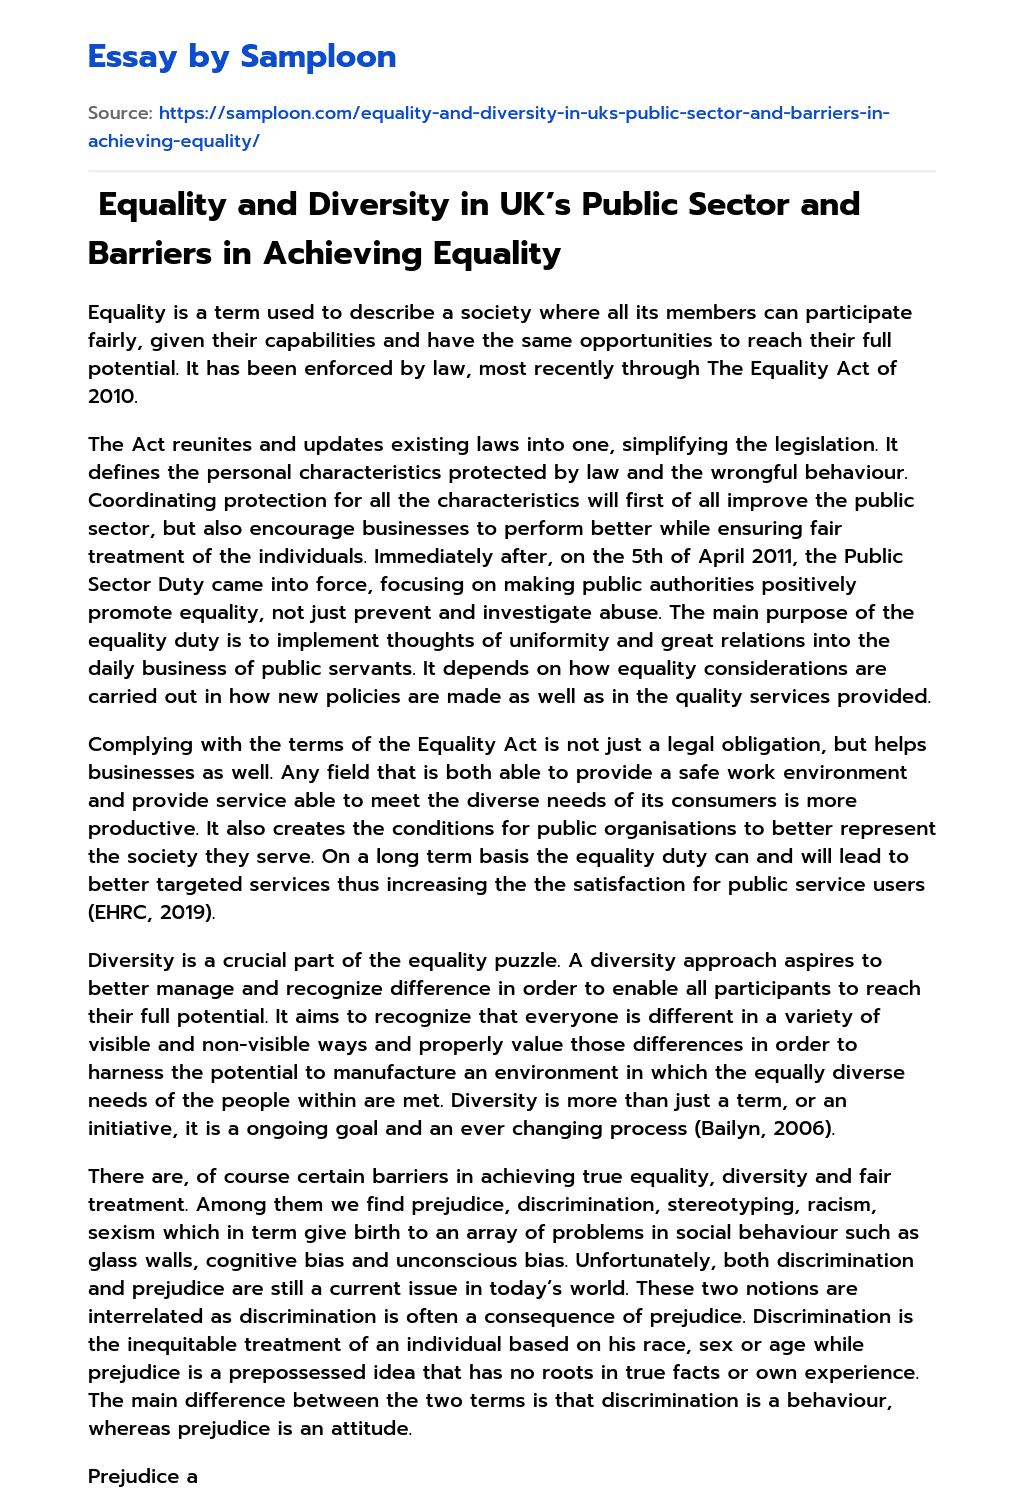  Equality and Diversity in UK’s Public Sector and Barriers in Achieving Equality essay